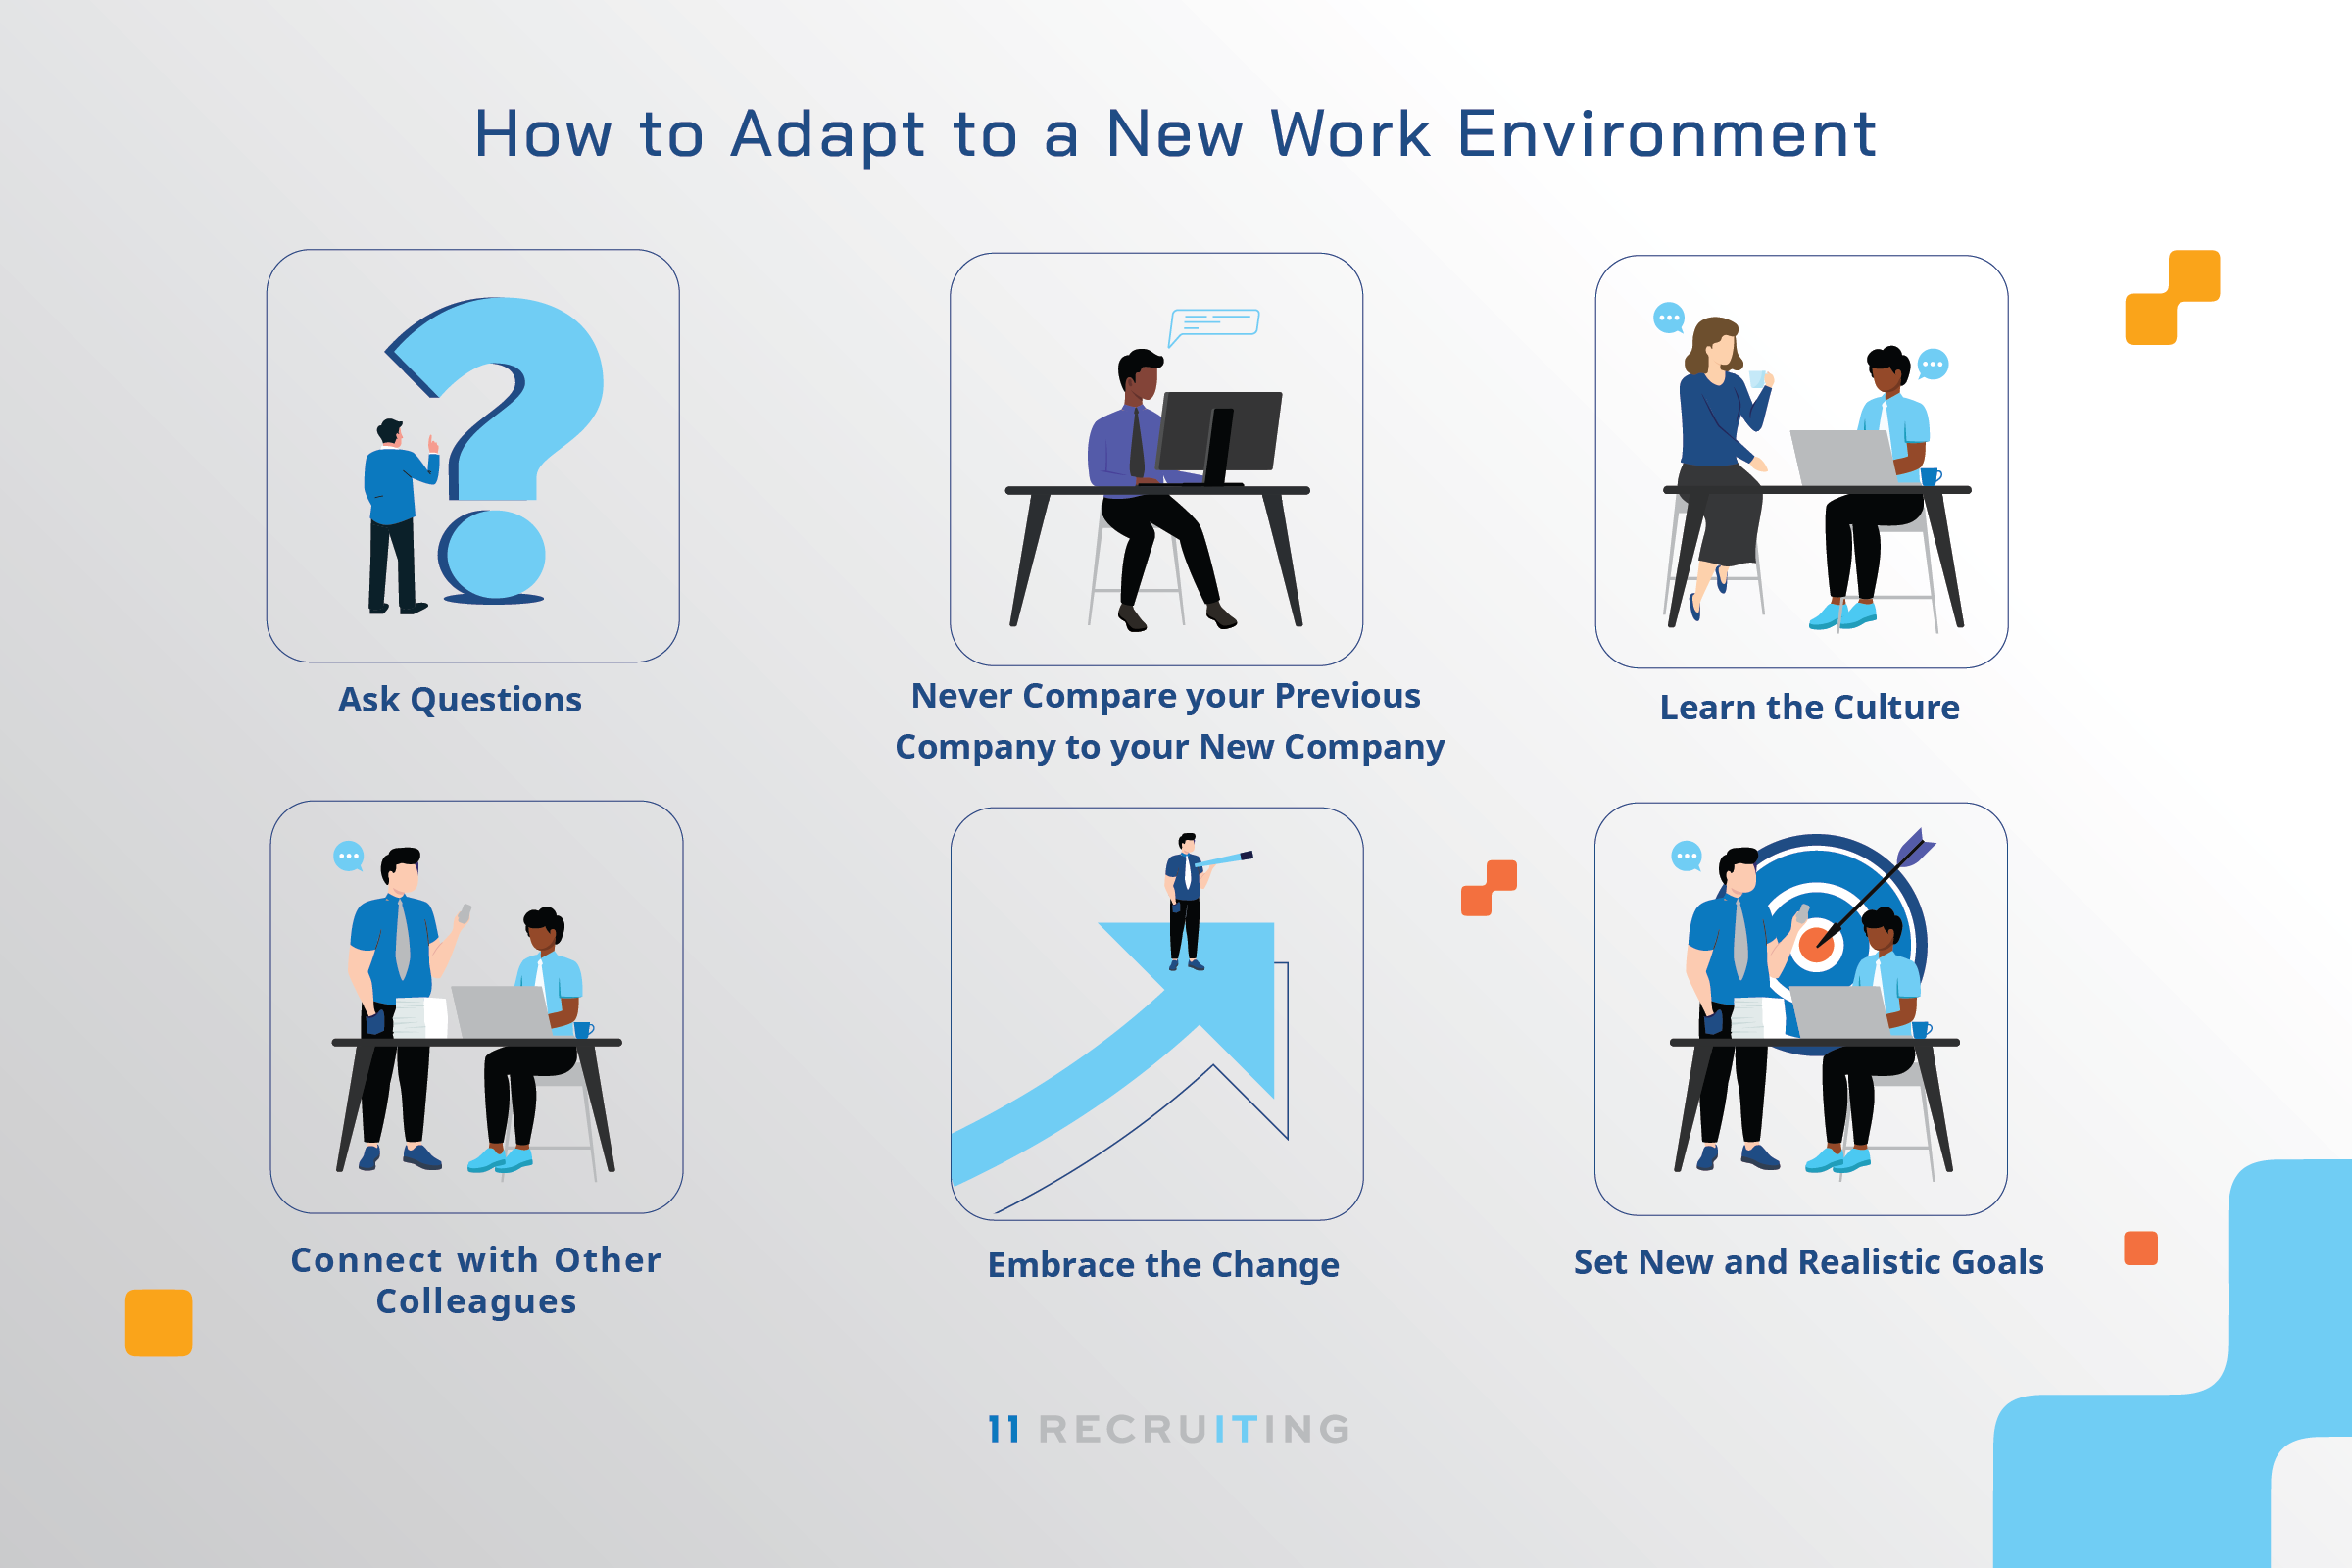 How to Adapt to a New Work Environment